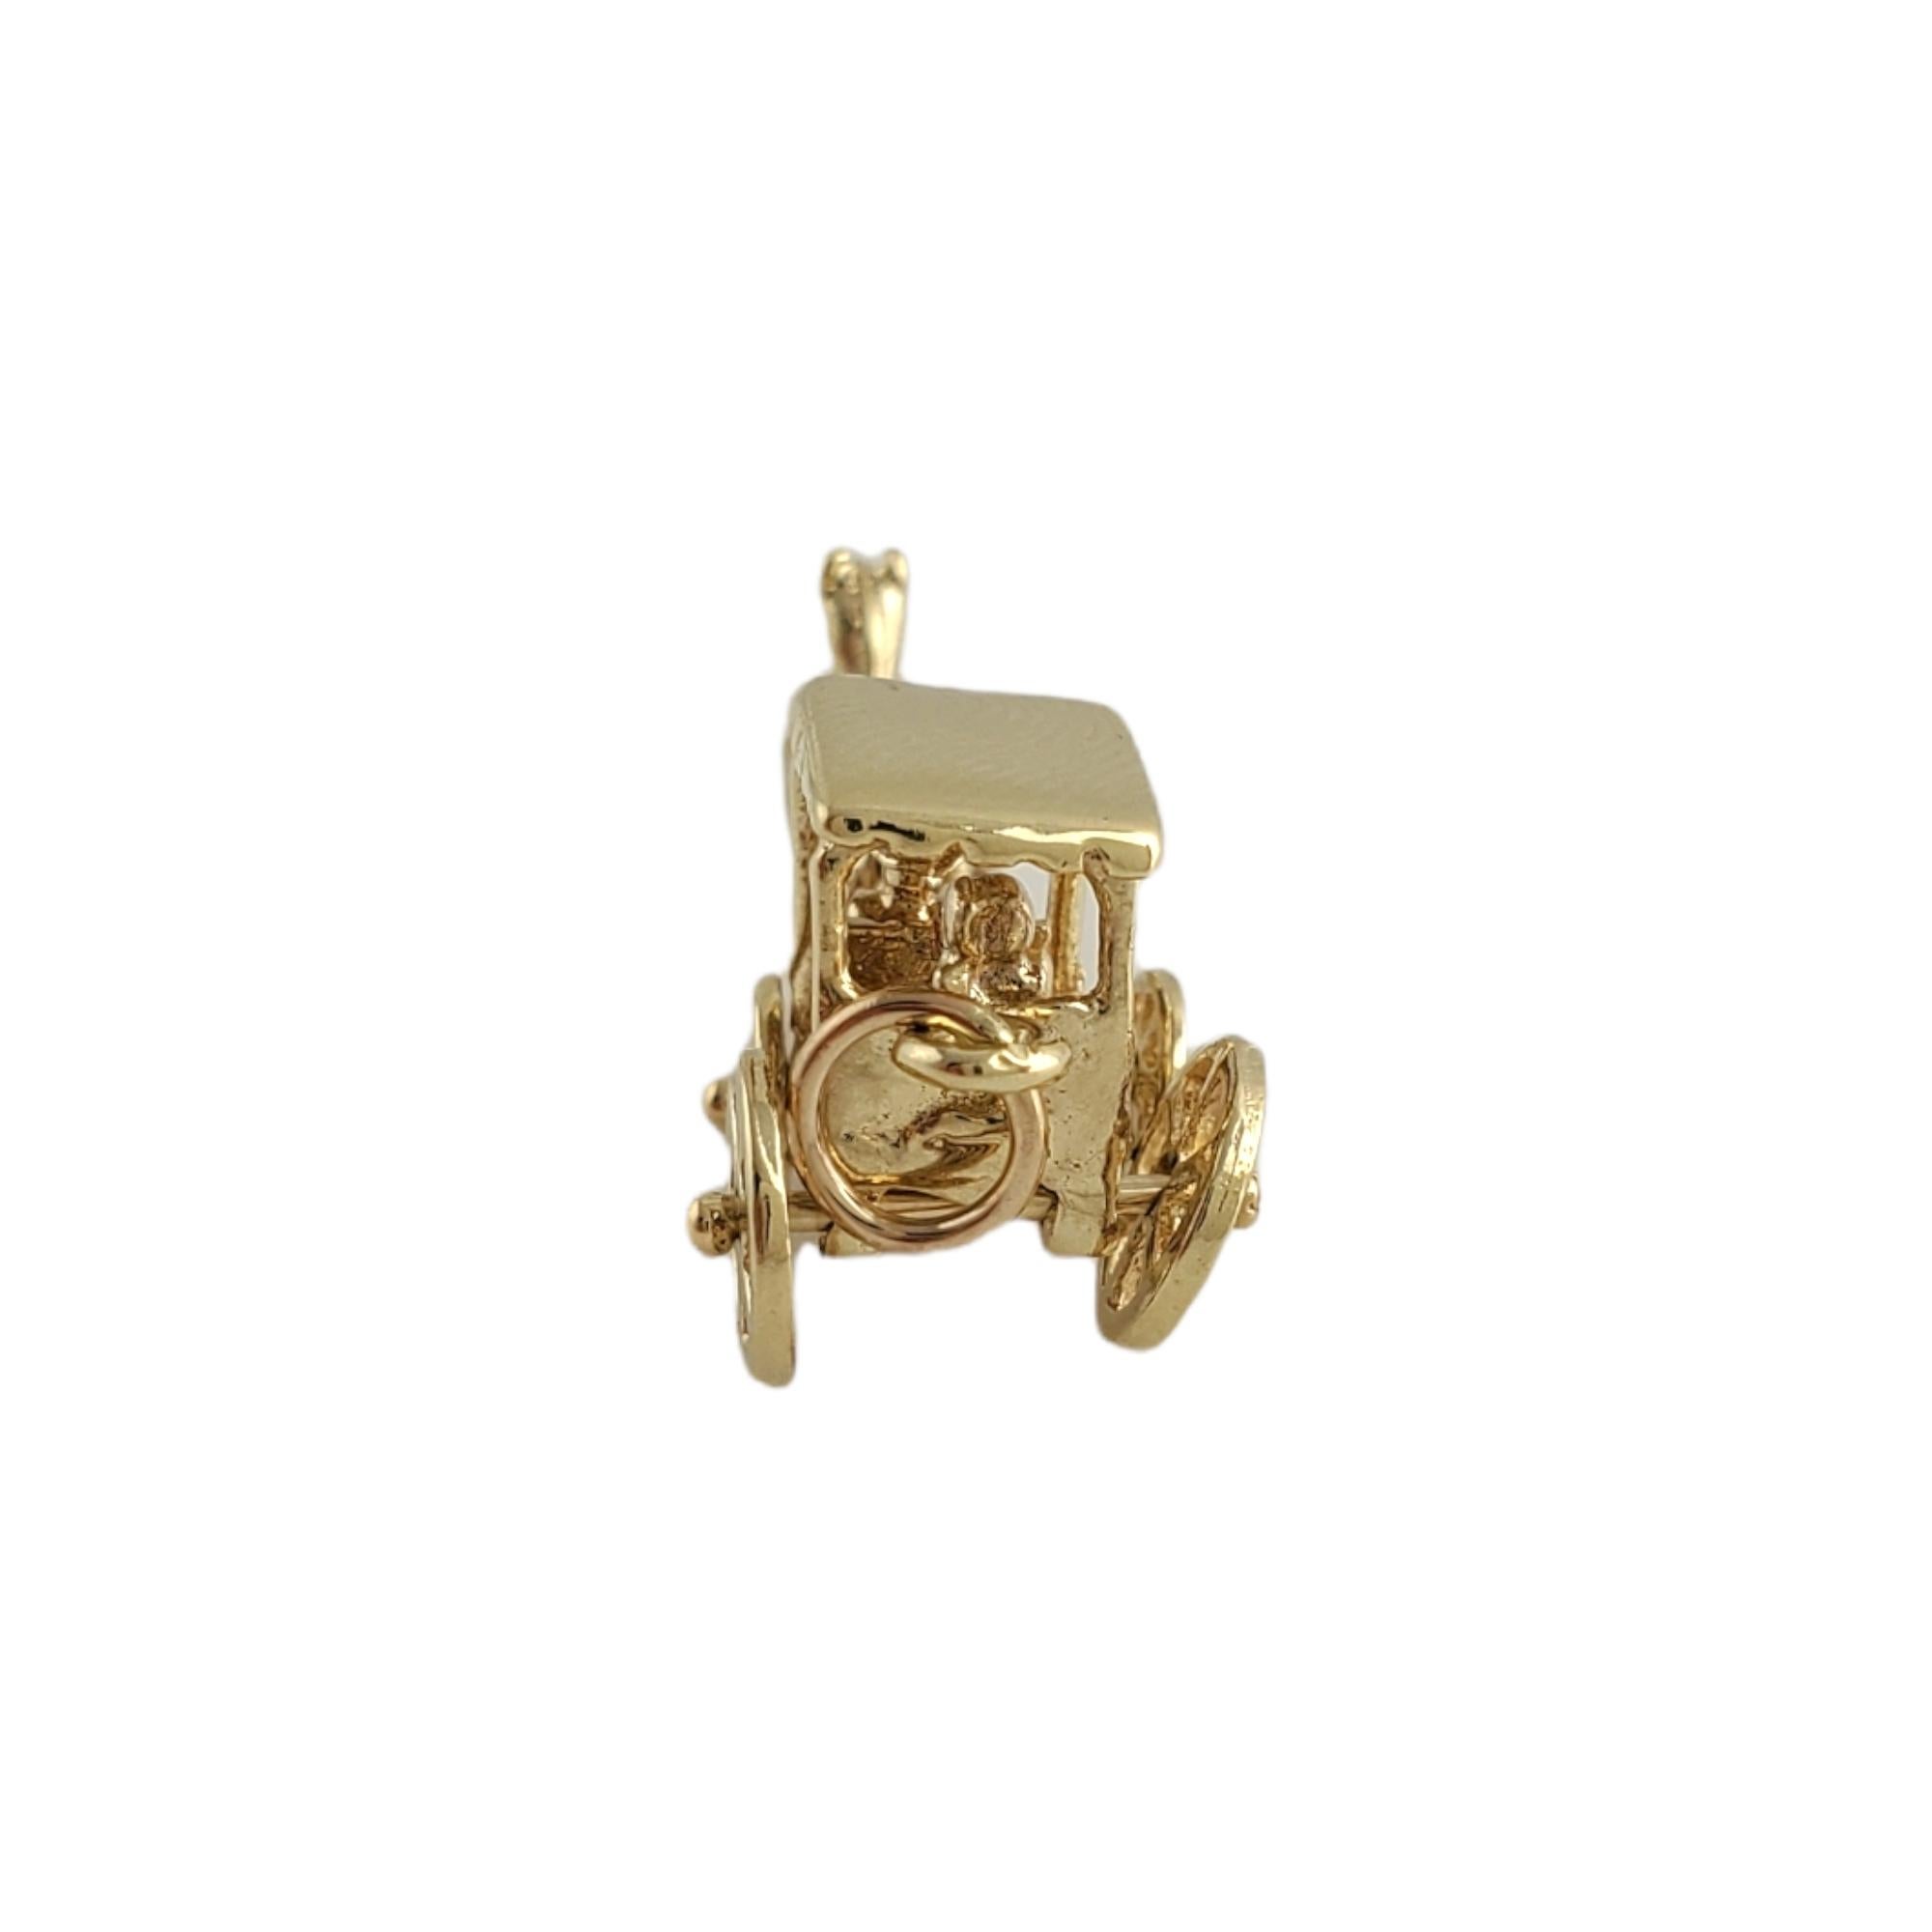 14K Yellow Gold Horse and Carriage Charm 

You'll love this adorable horse and carriage charm! 

Size: 9.64mm X 25.75mm

Weight:  2.9gr /  1.8dwt

Very good condition, professionally polished.

Will come packaged in a gift box and will be shipped